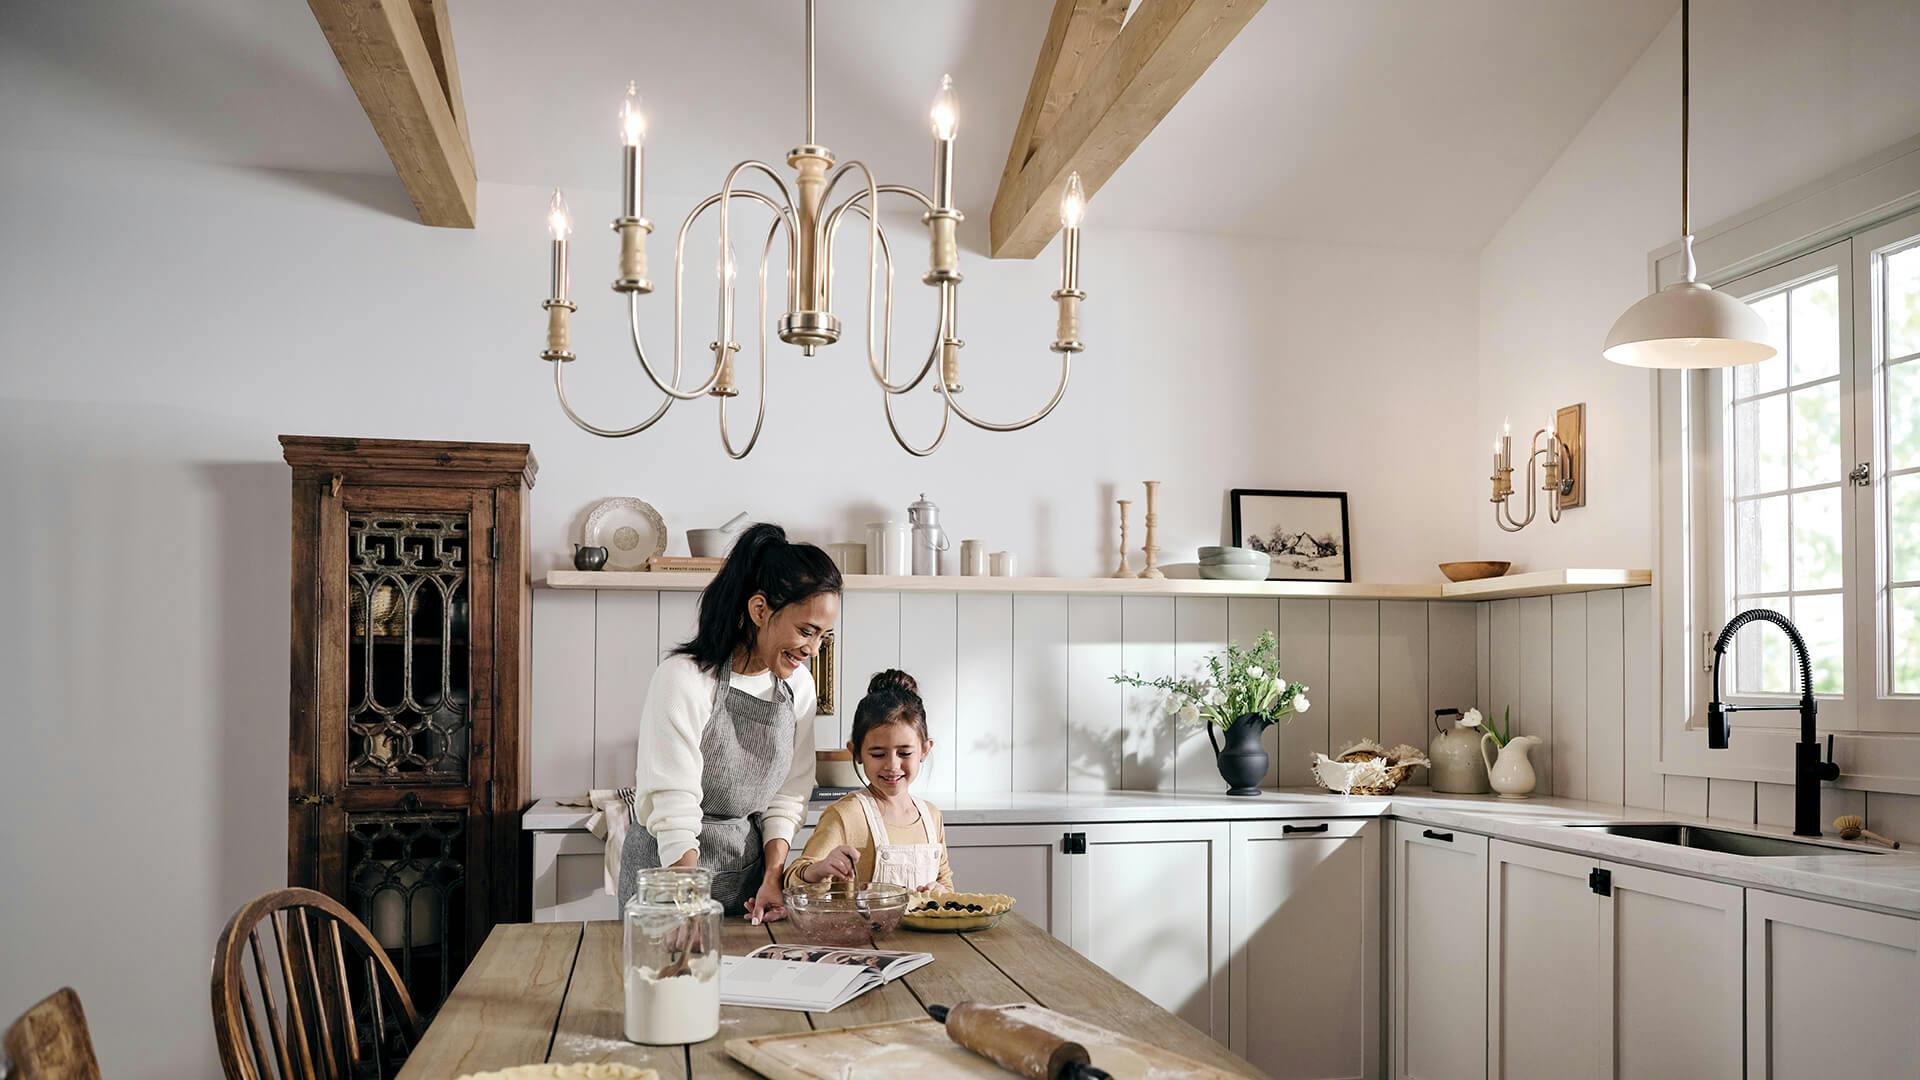 Mom and daughter baking in a rustic kitchen featuring a Karthe chandelier